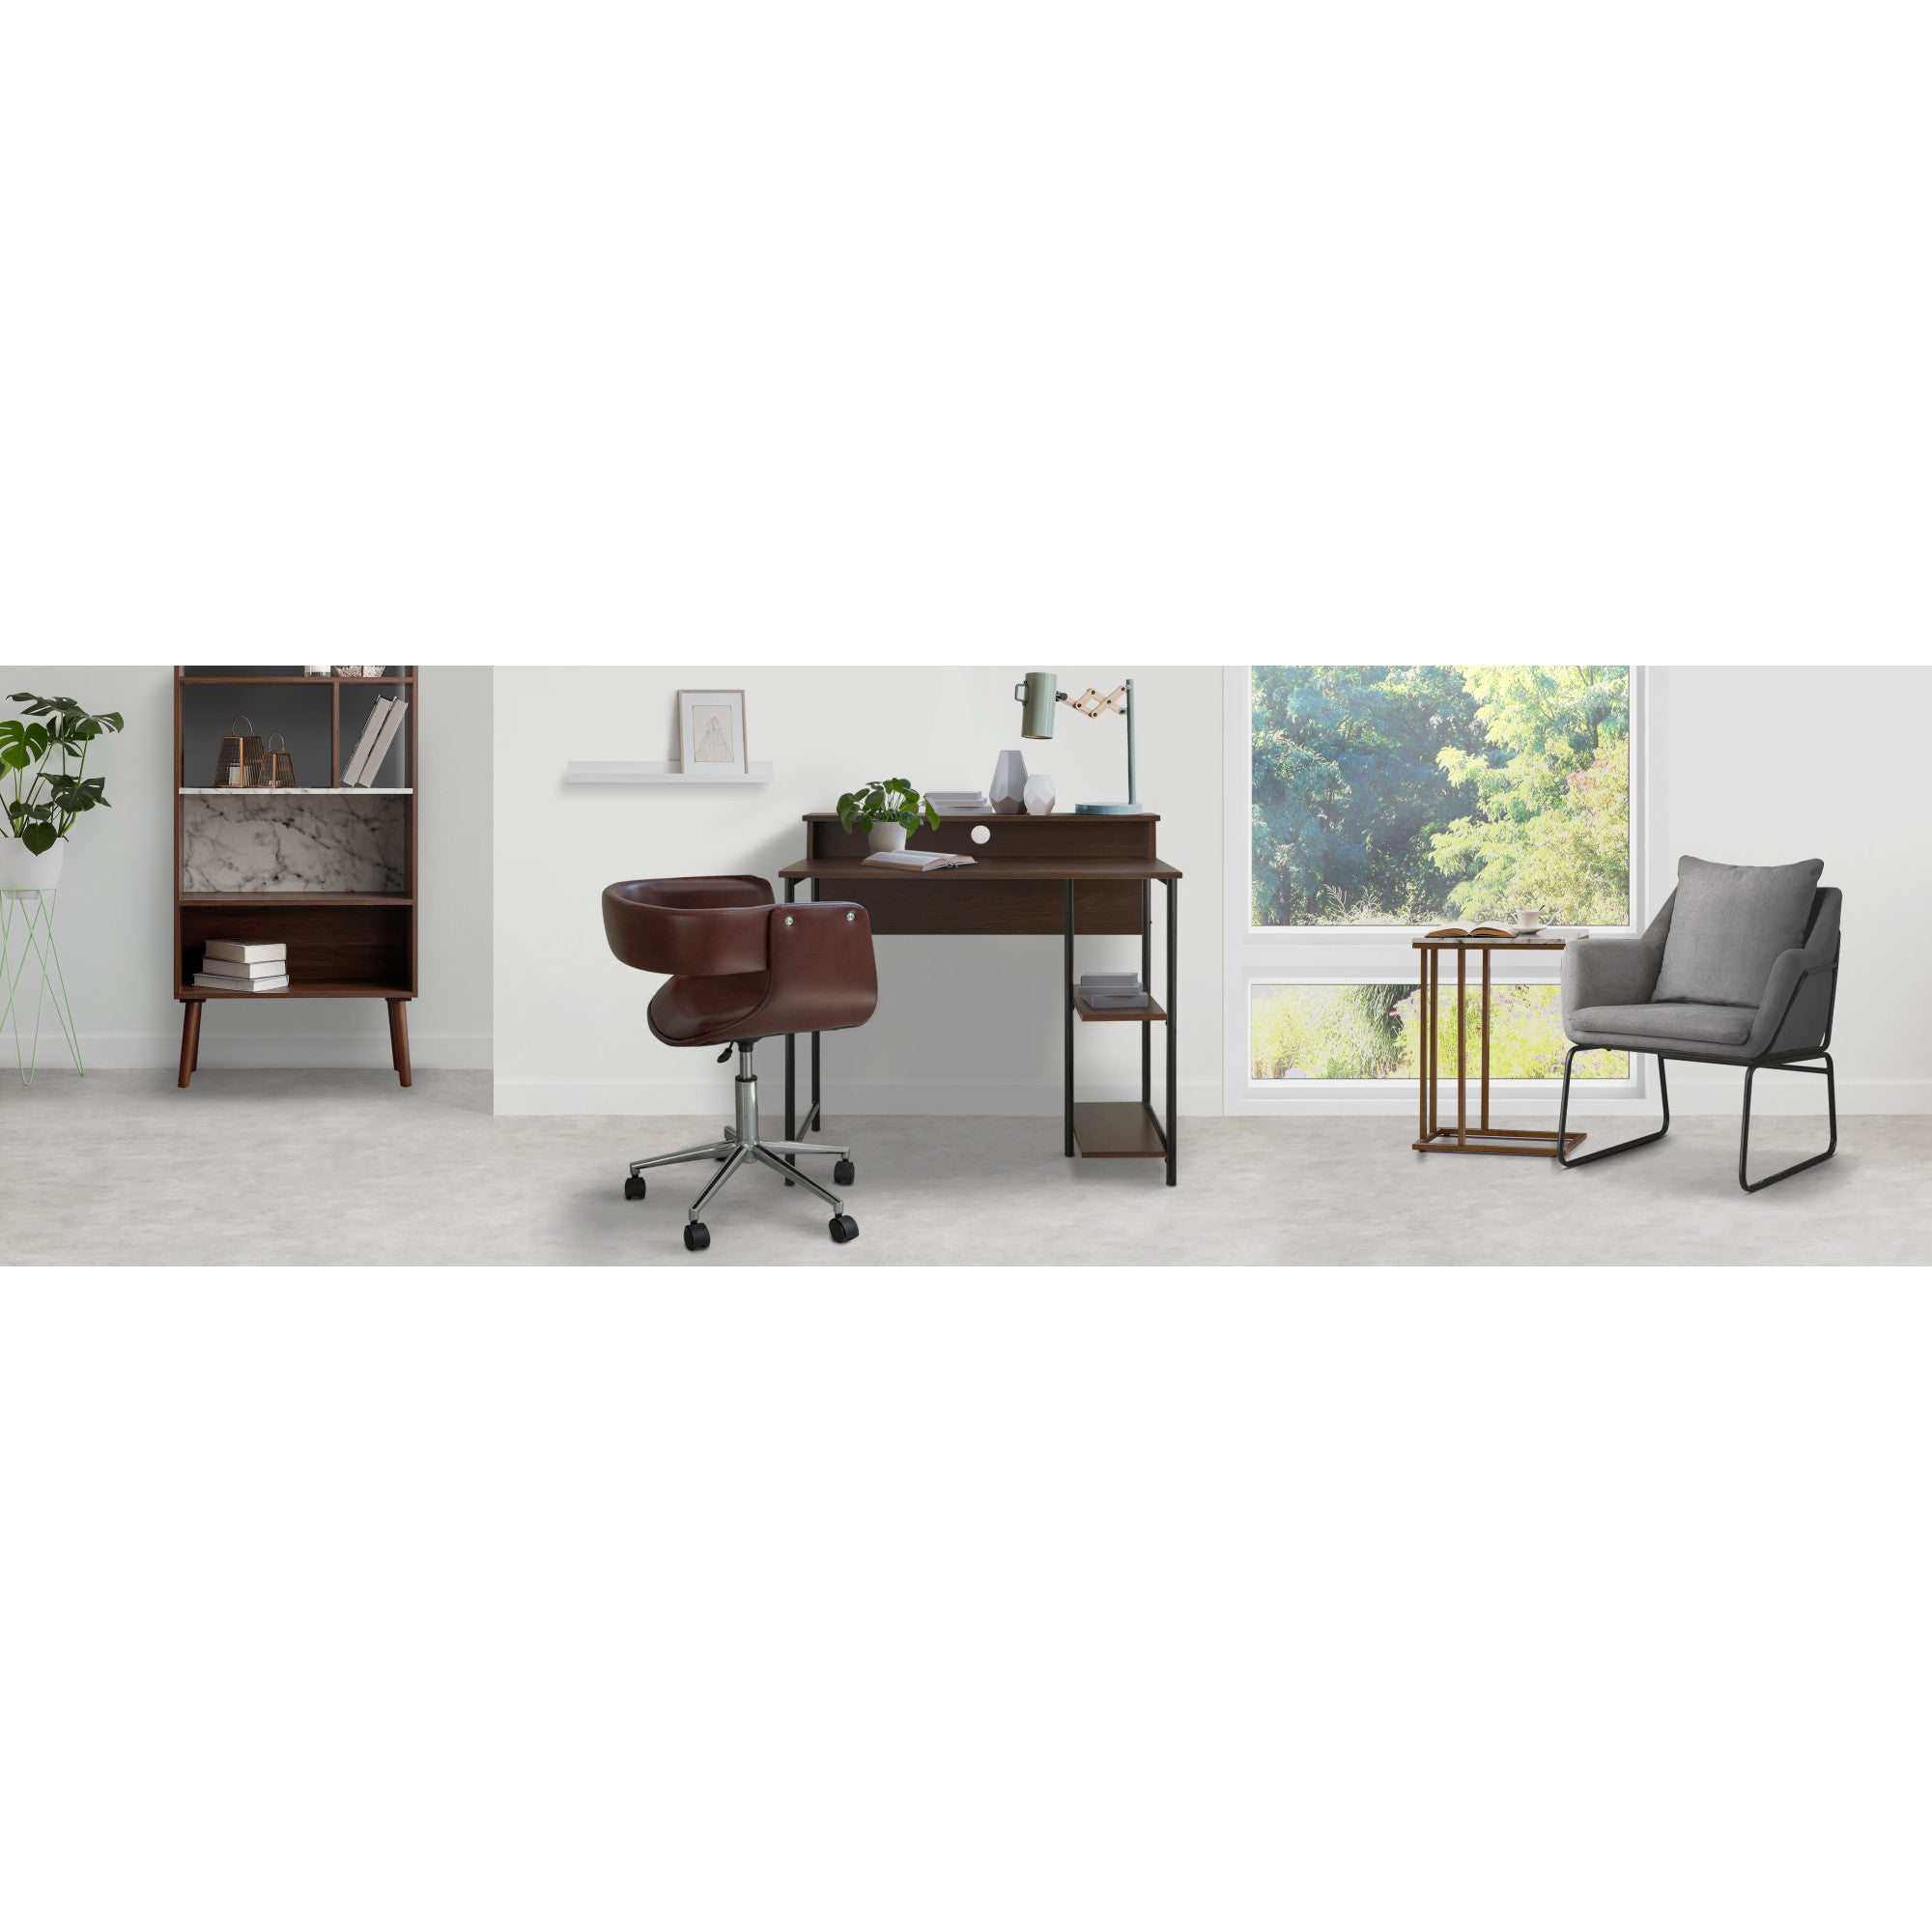 Teamson Home Modern PU Leather Office Chair with Adjustable Ergonomic Seat, Swivel Base, Brown/Chrome